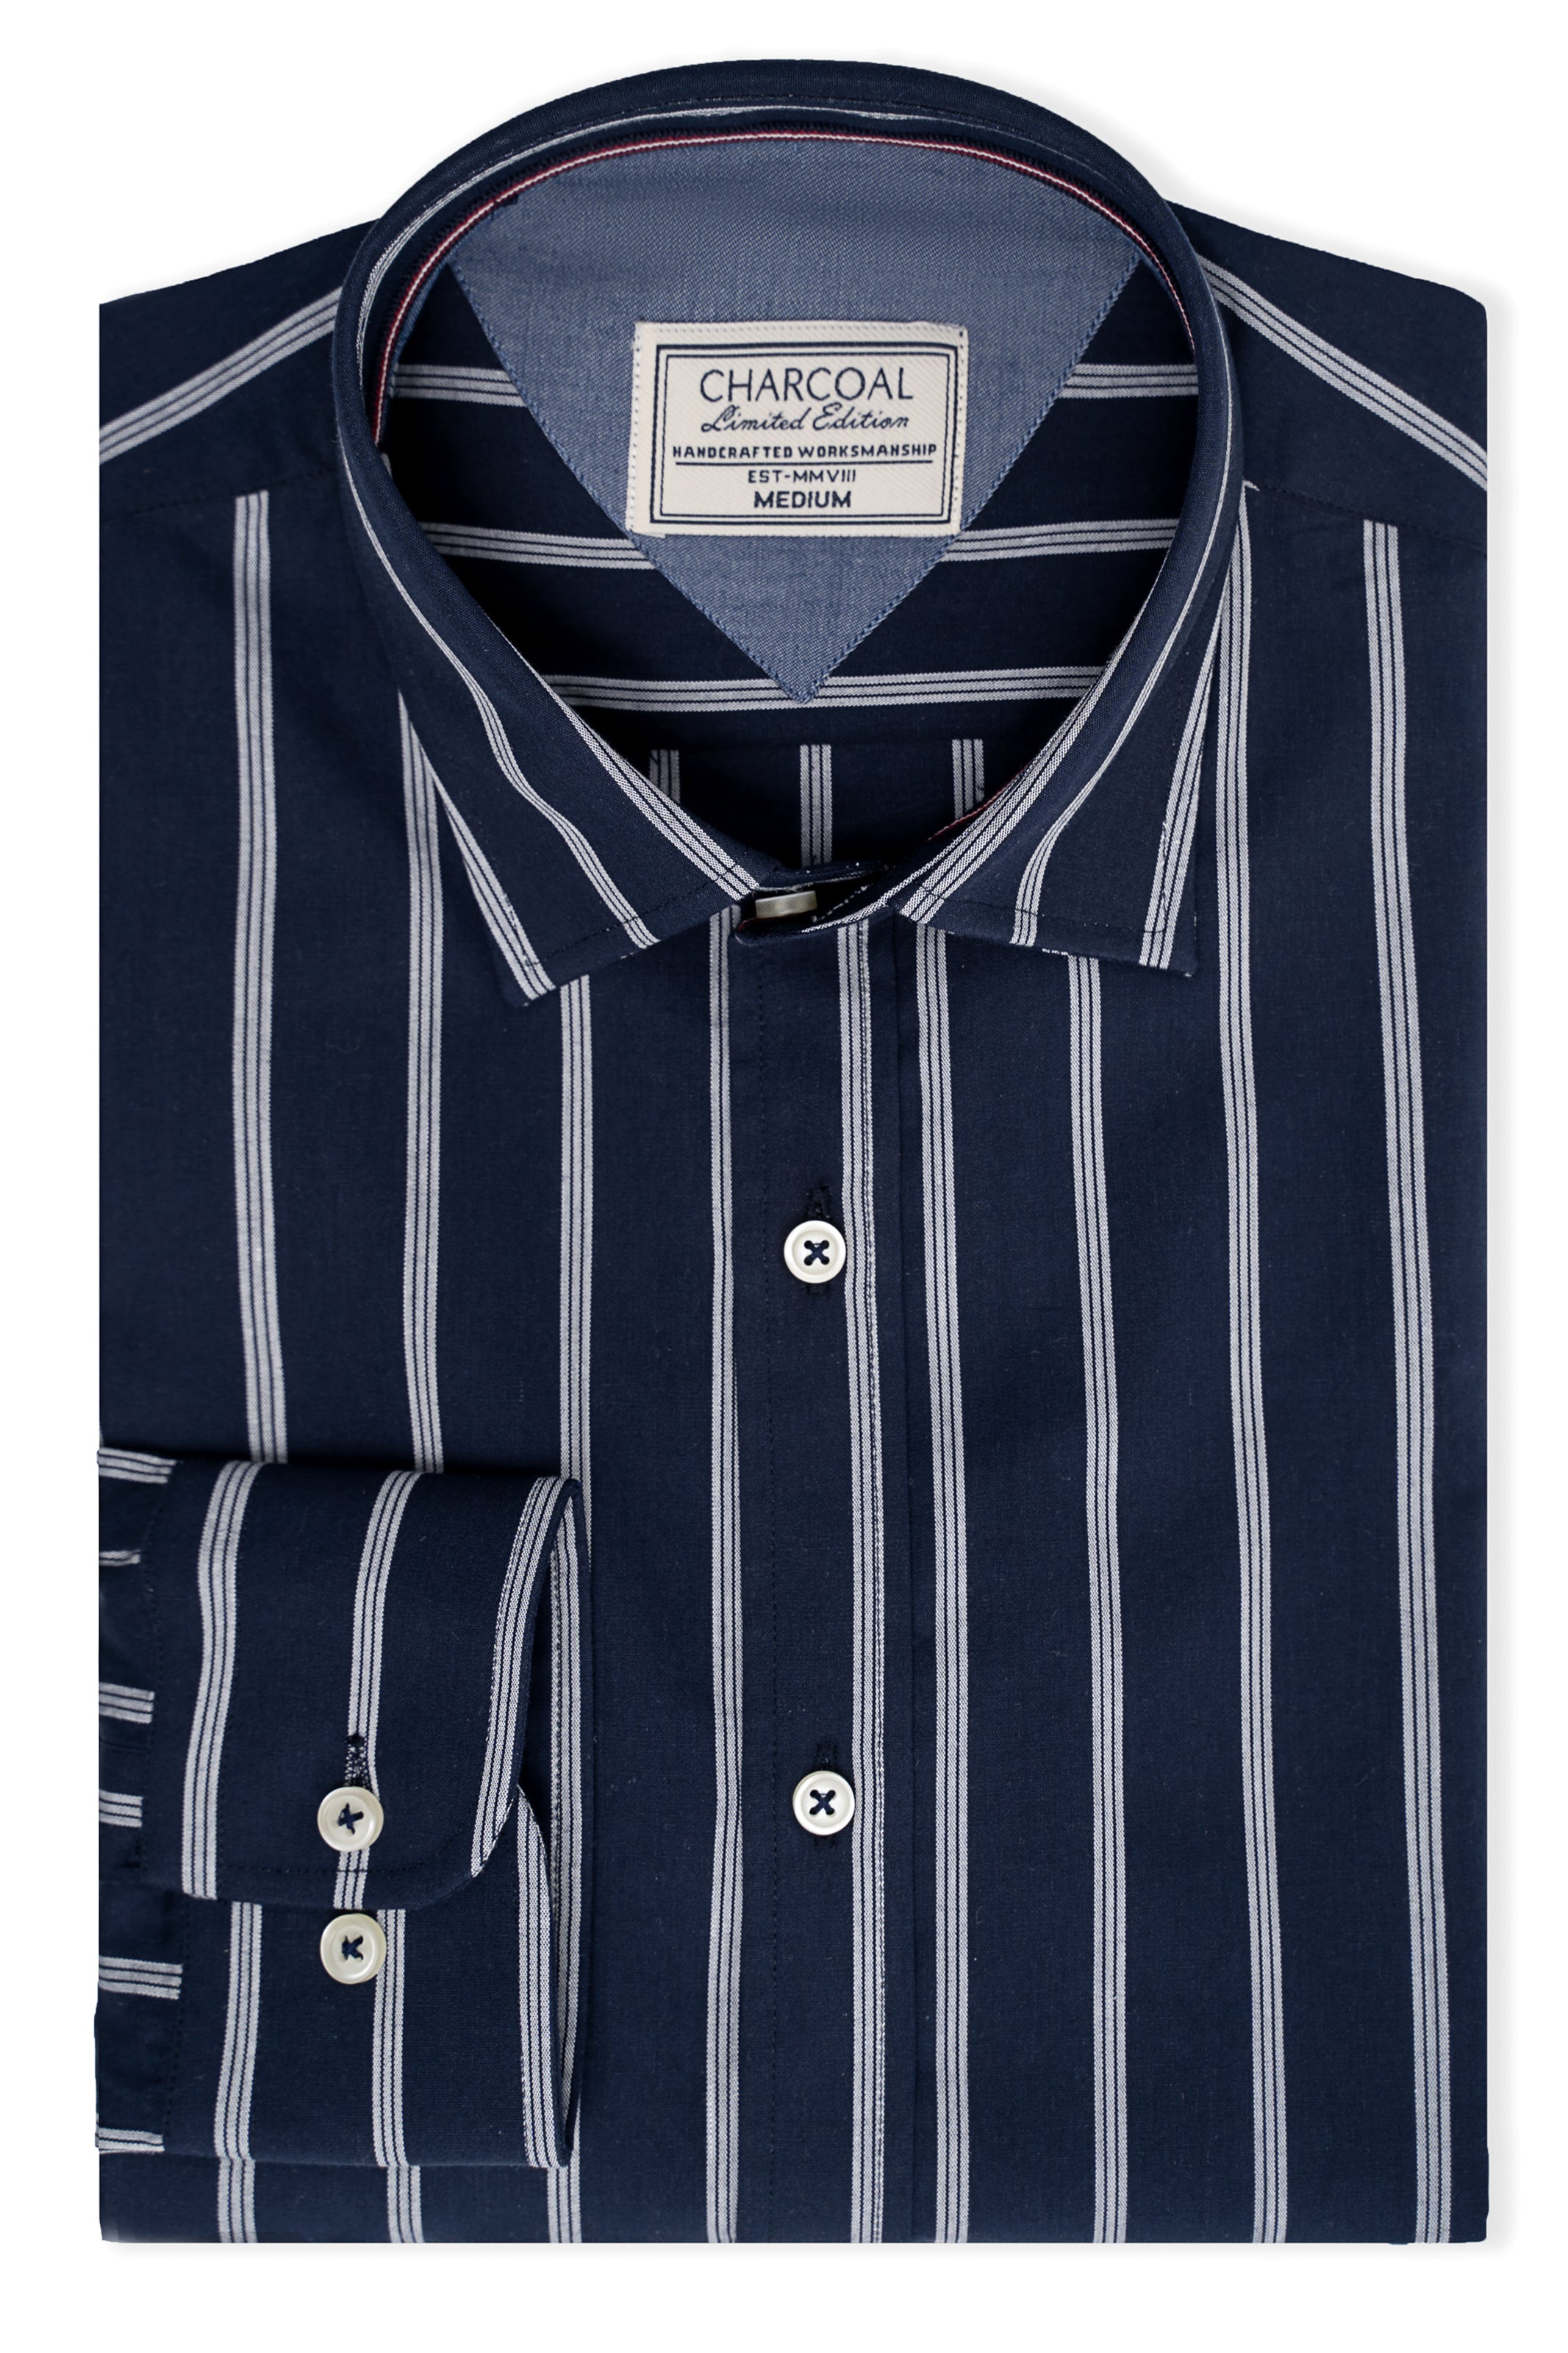 LIMITED EDITION SHIRTS NAVY WHITE STRIPES